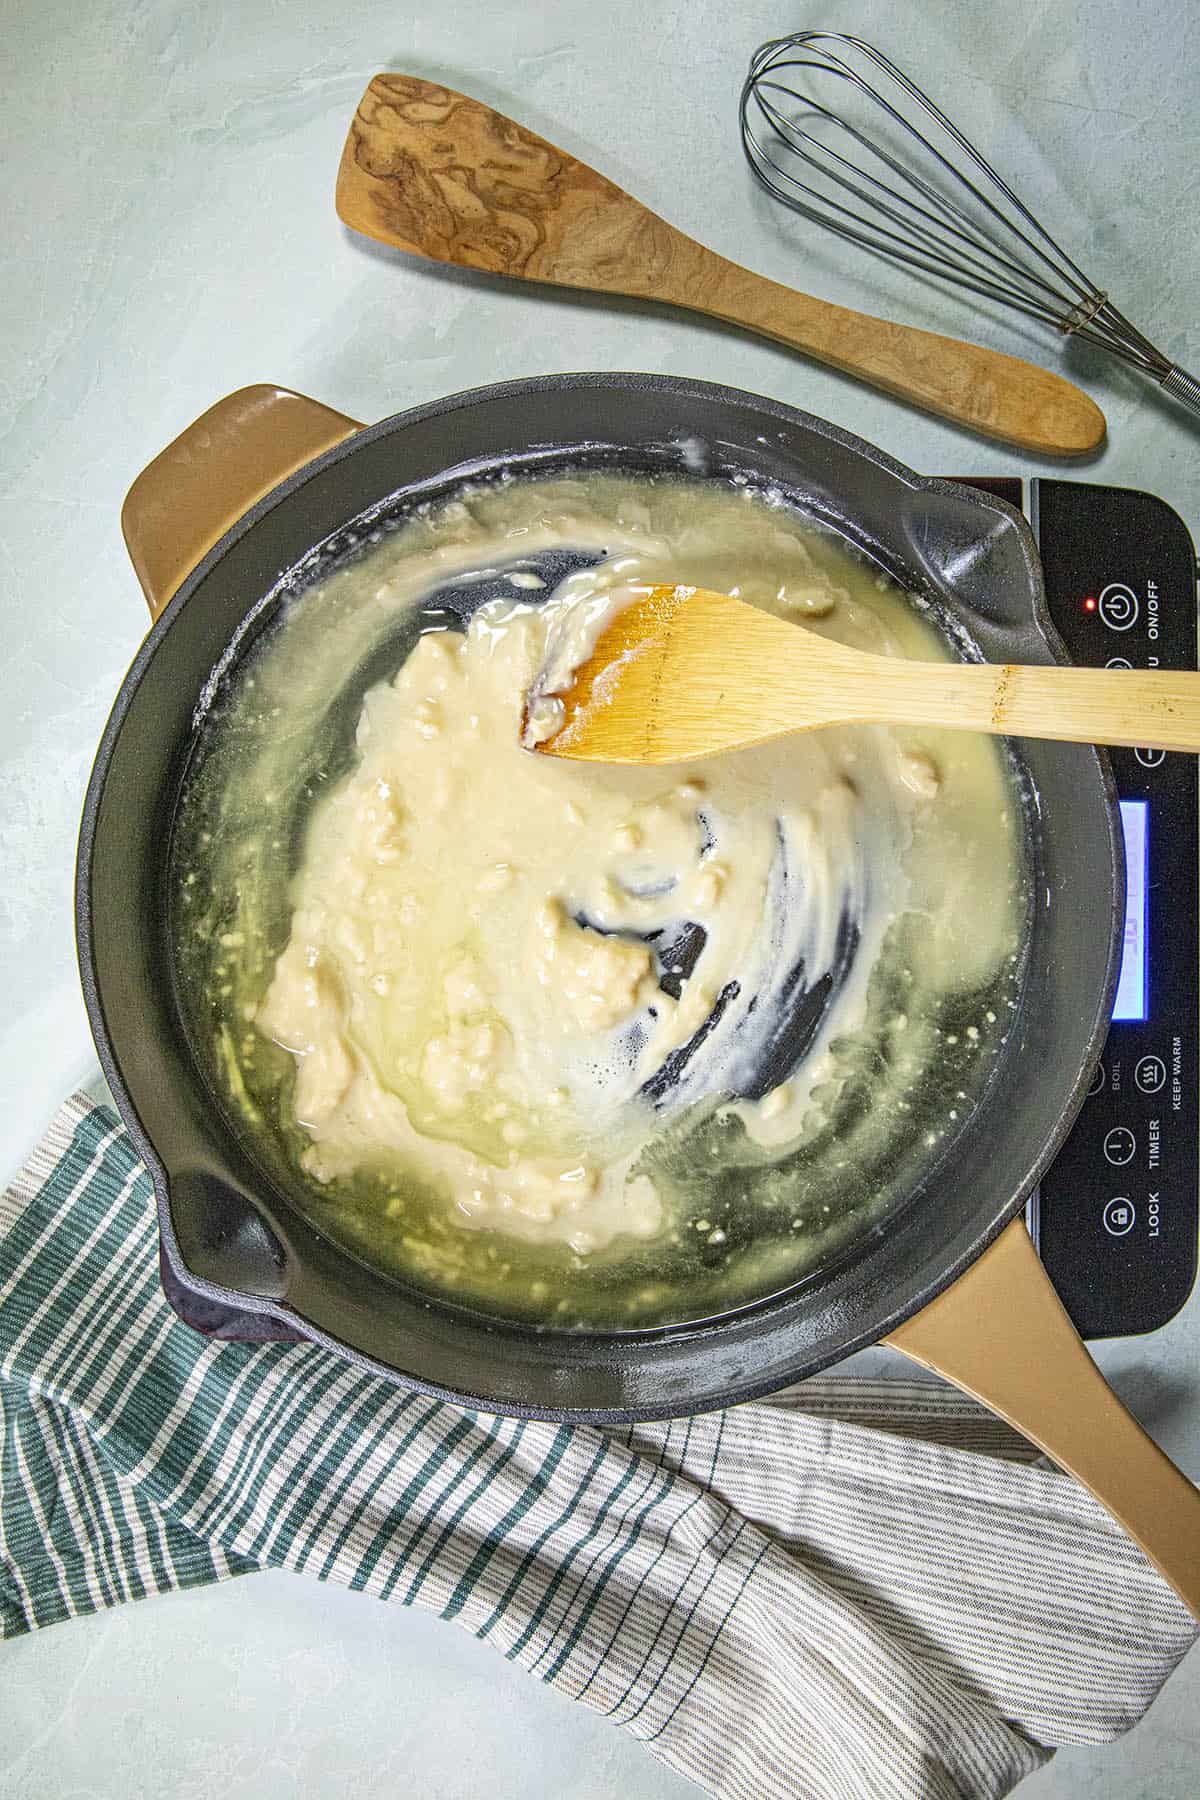 Mixing flour and oil in a pan to make roux